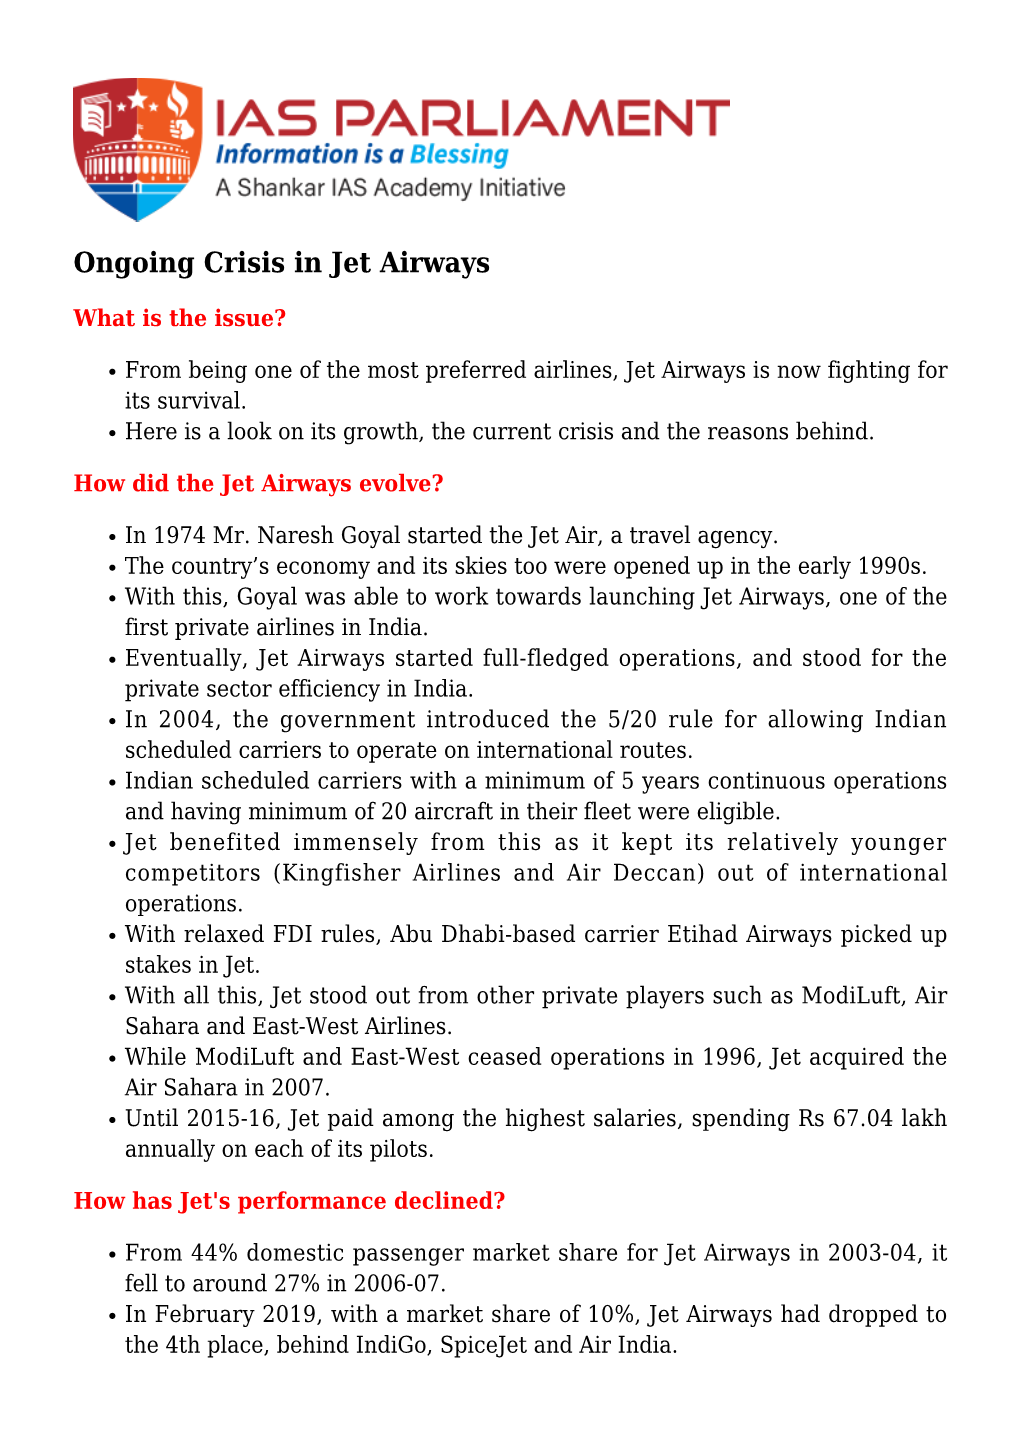 Ongoing Crisis in Jet Airways